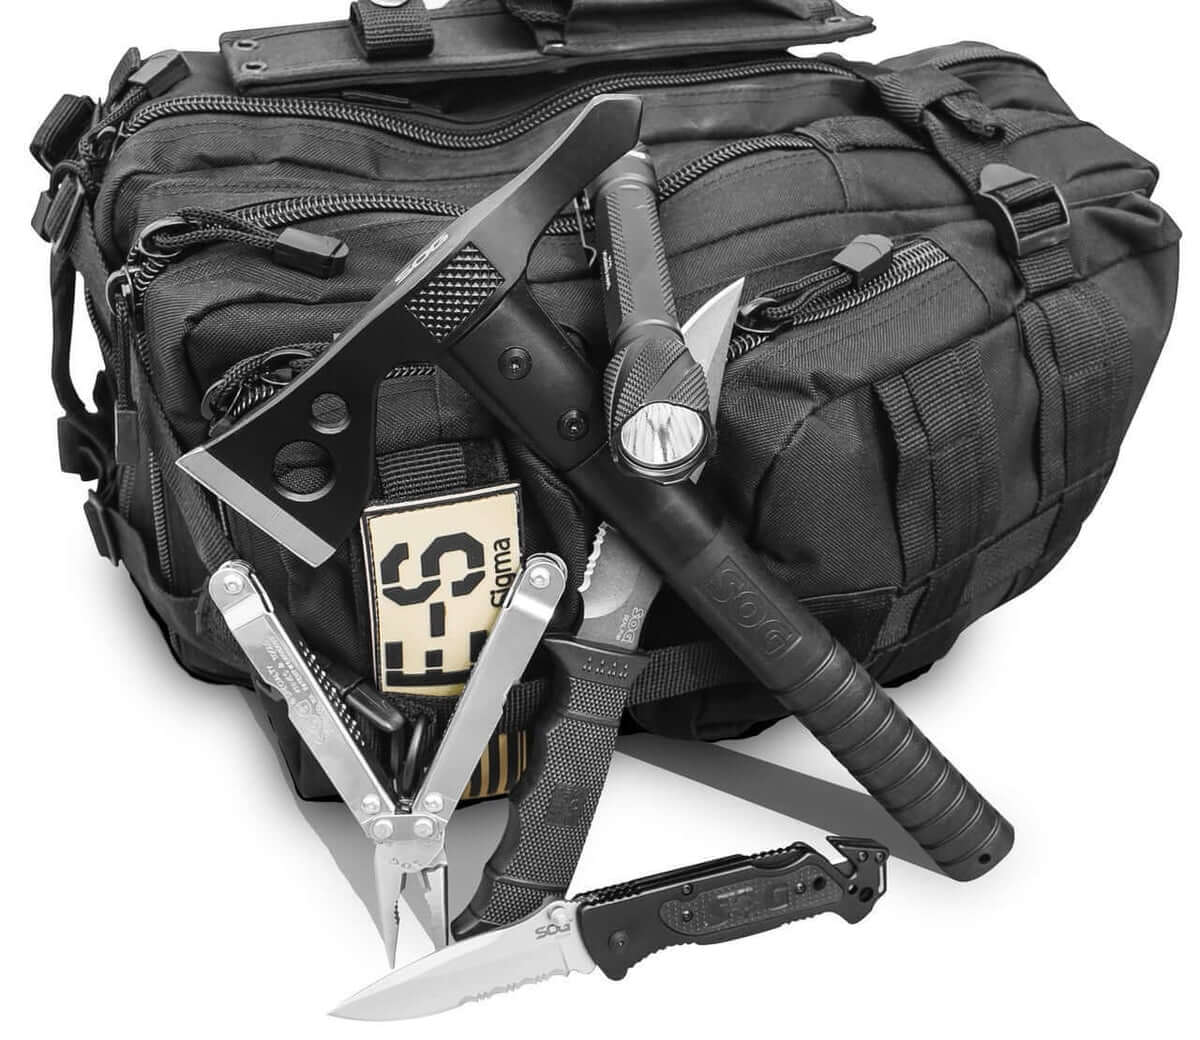 Survival Gear BSO  Outdoor Equipment, Gear and Gadgets